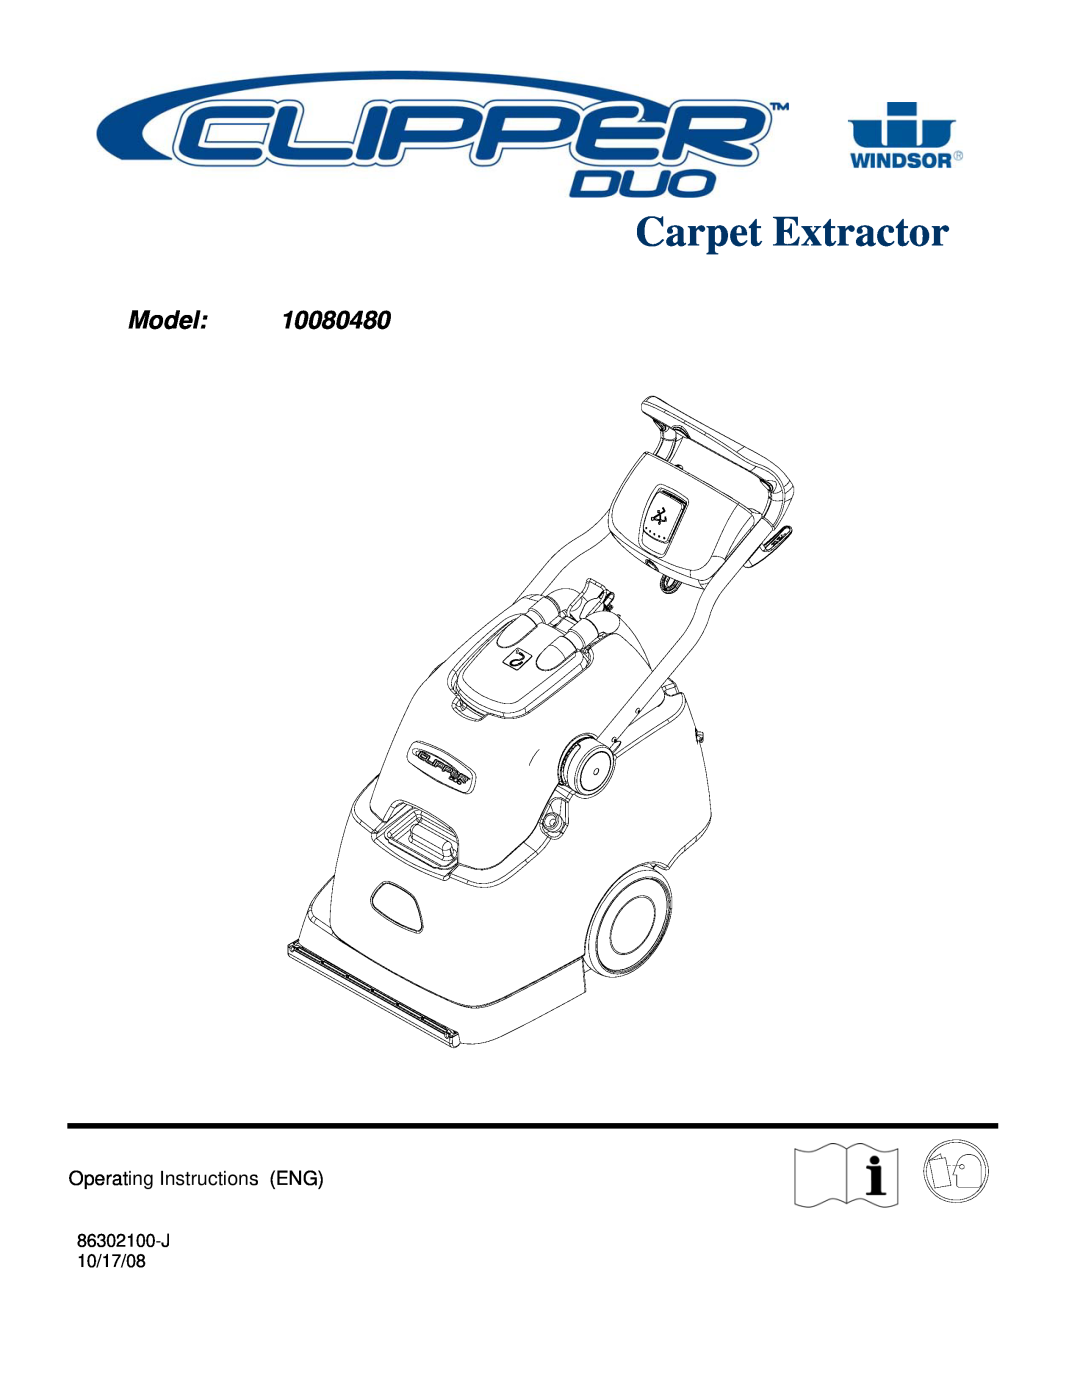 Windsor 10080480 operating instructions Model, Carpet Extractor 